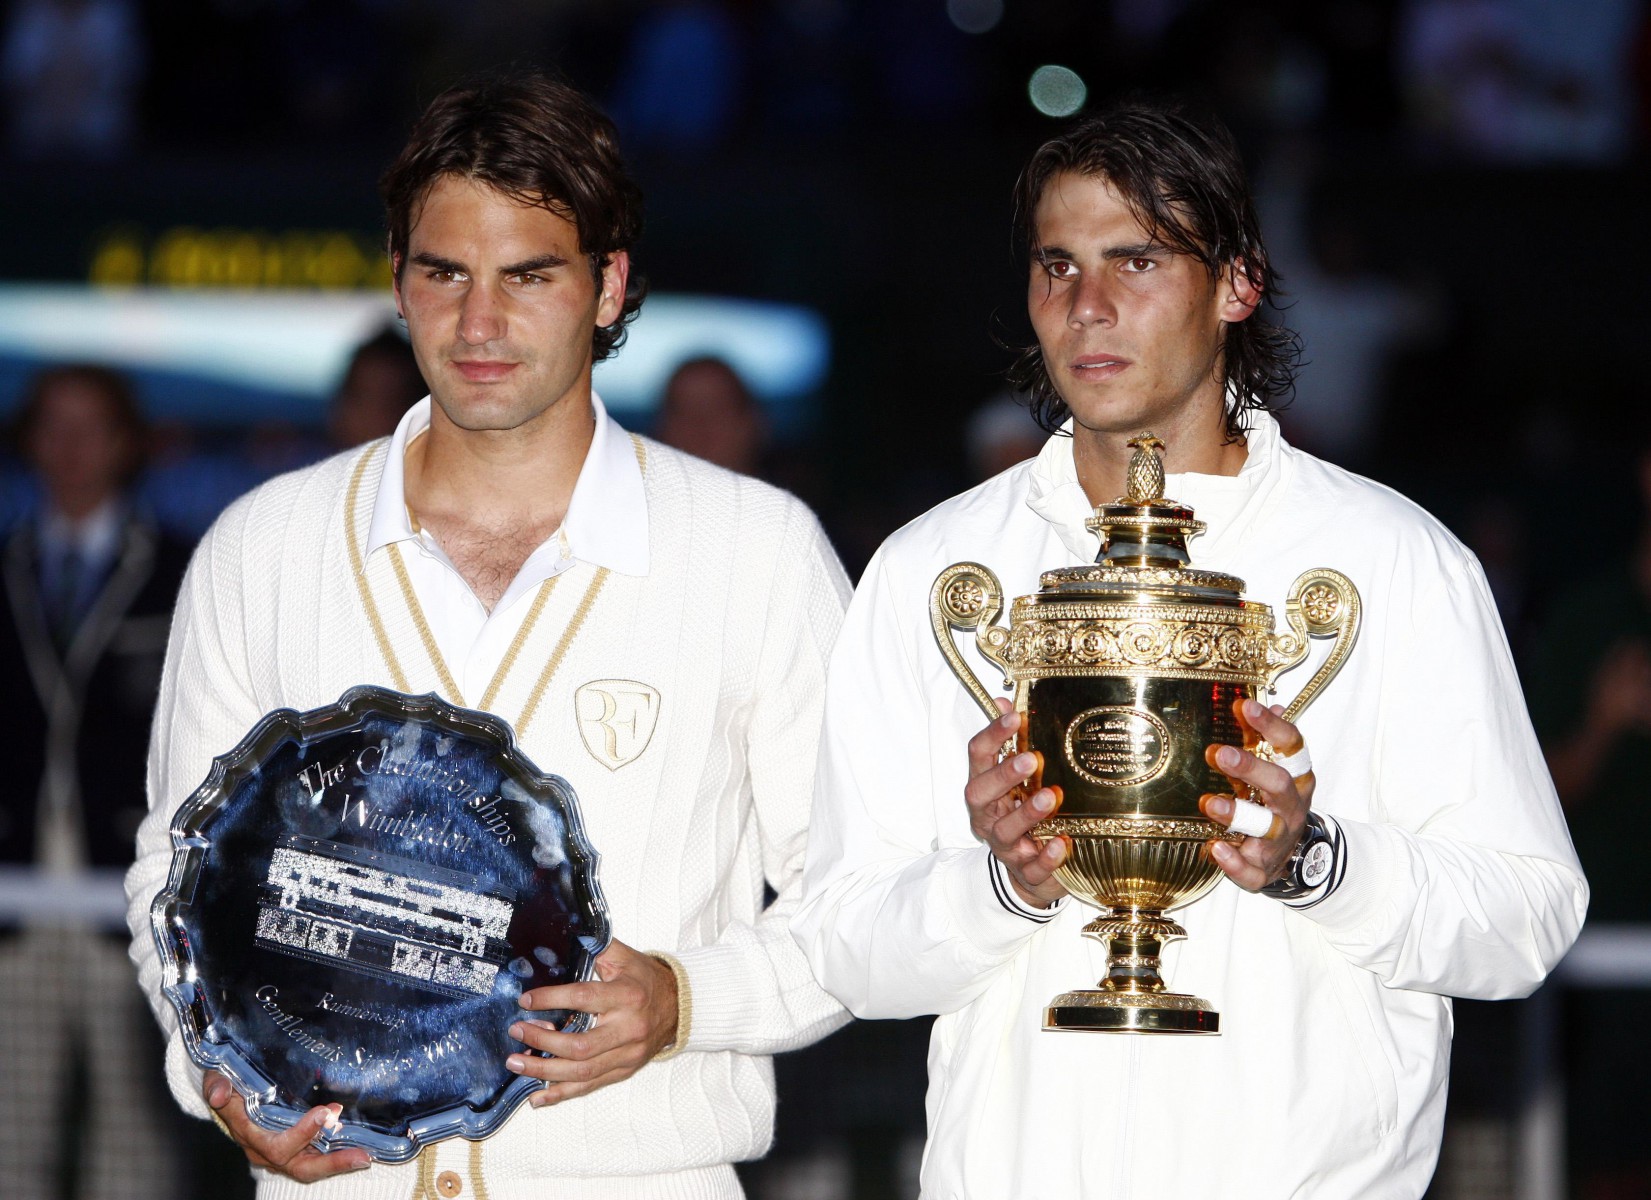 Nadal overcame Federer 9-7 in the fifth set in the Wimbledon 2008 final in arguably the greatest match ever